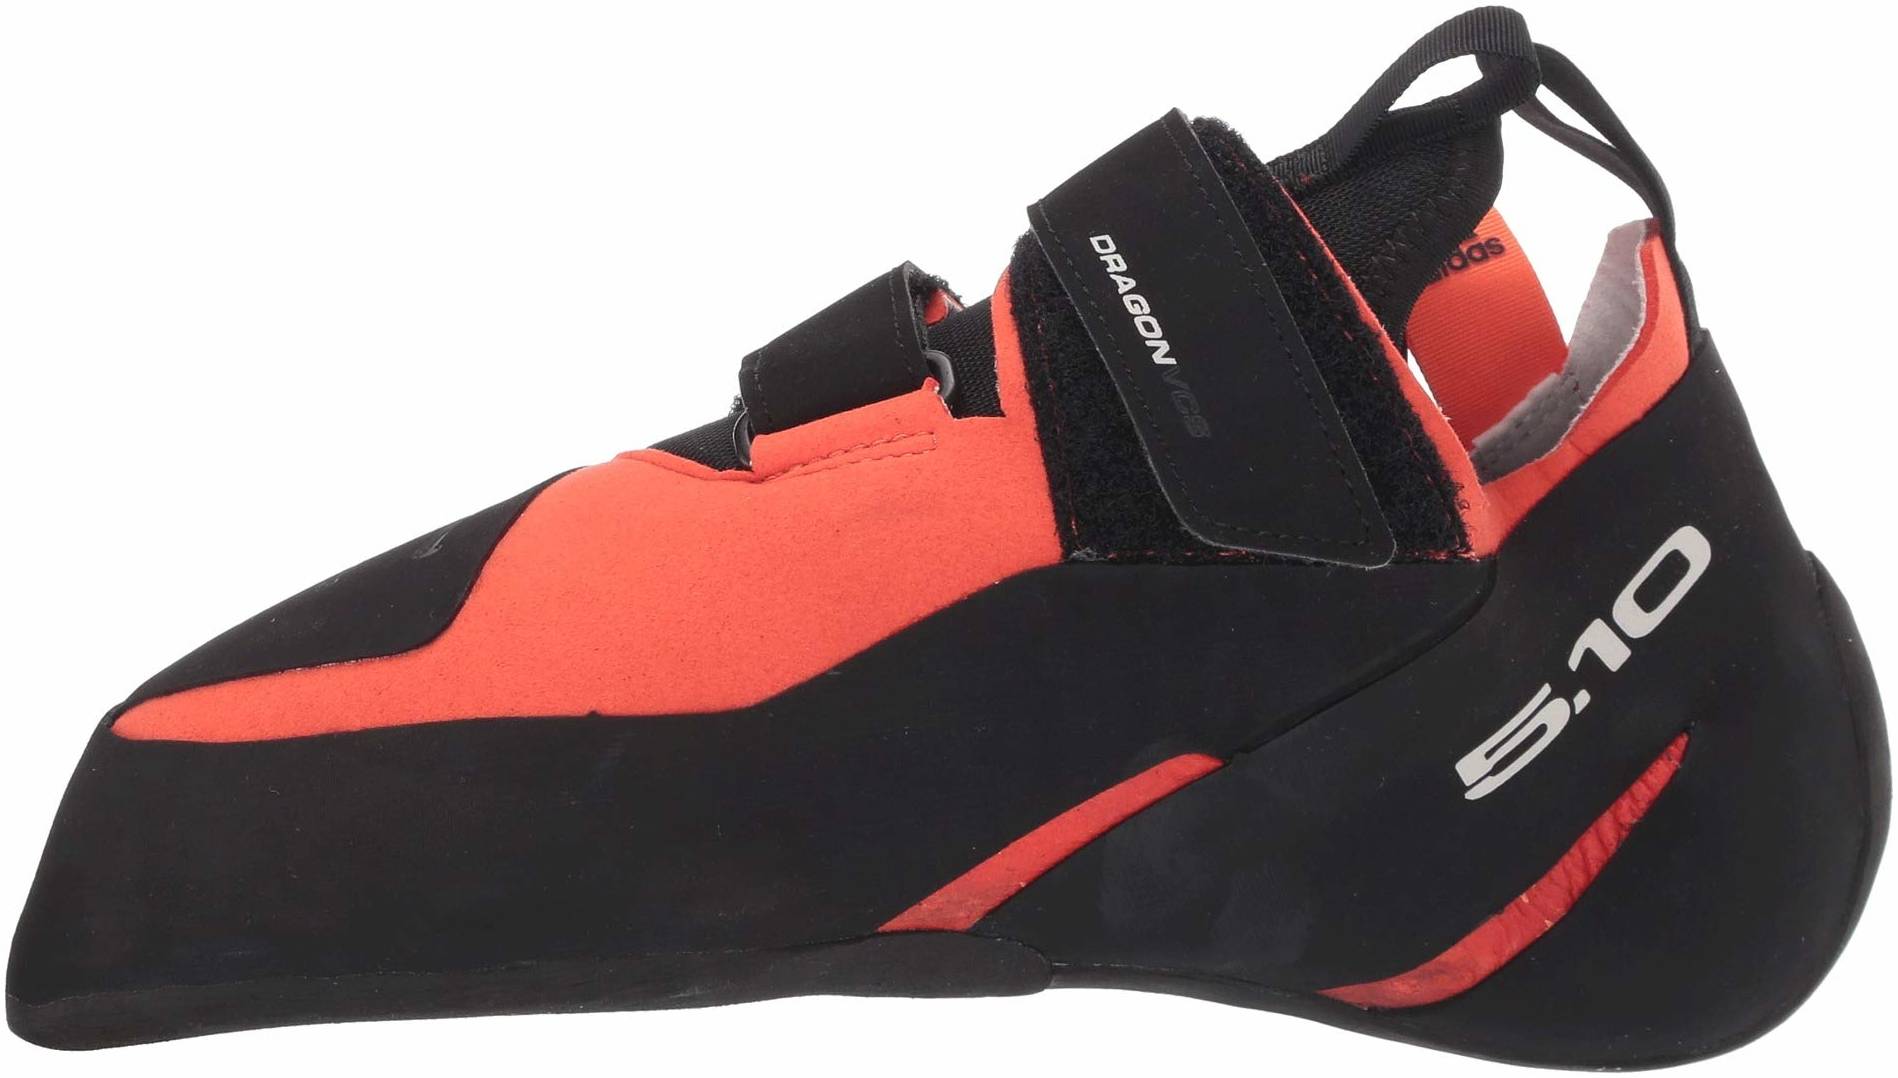 Save 56% on Five Ten Climbing Shoes (20 